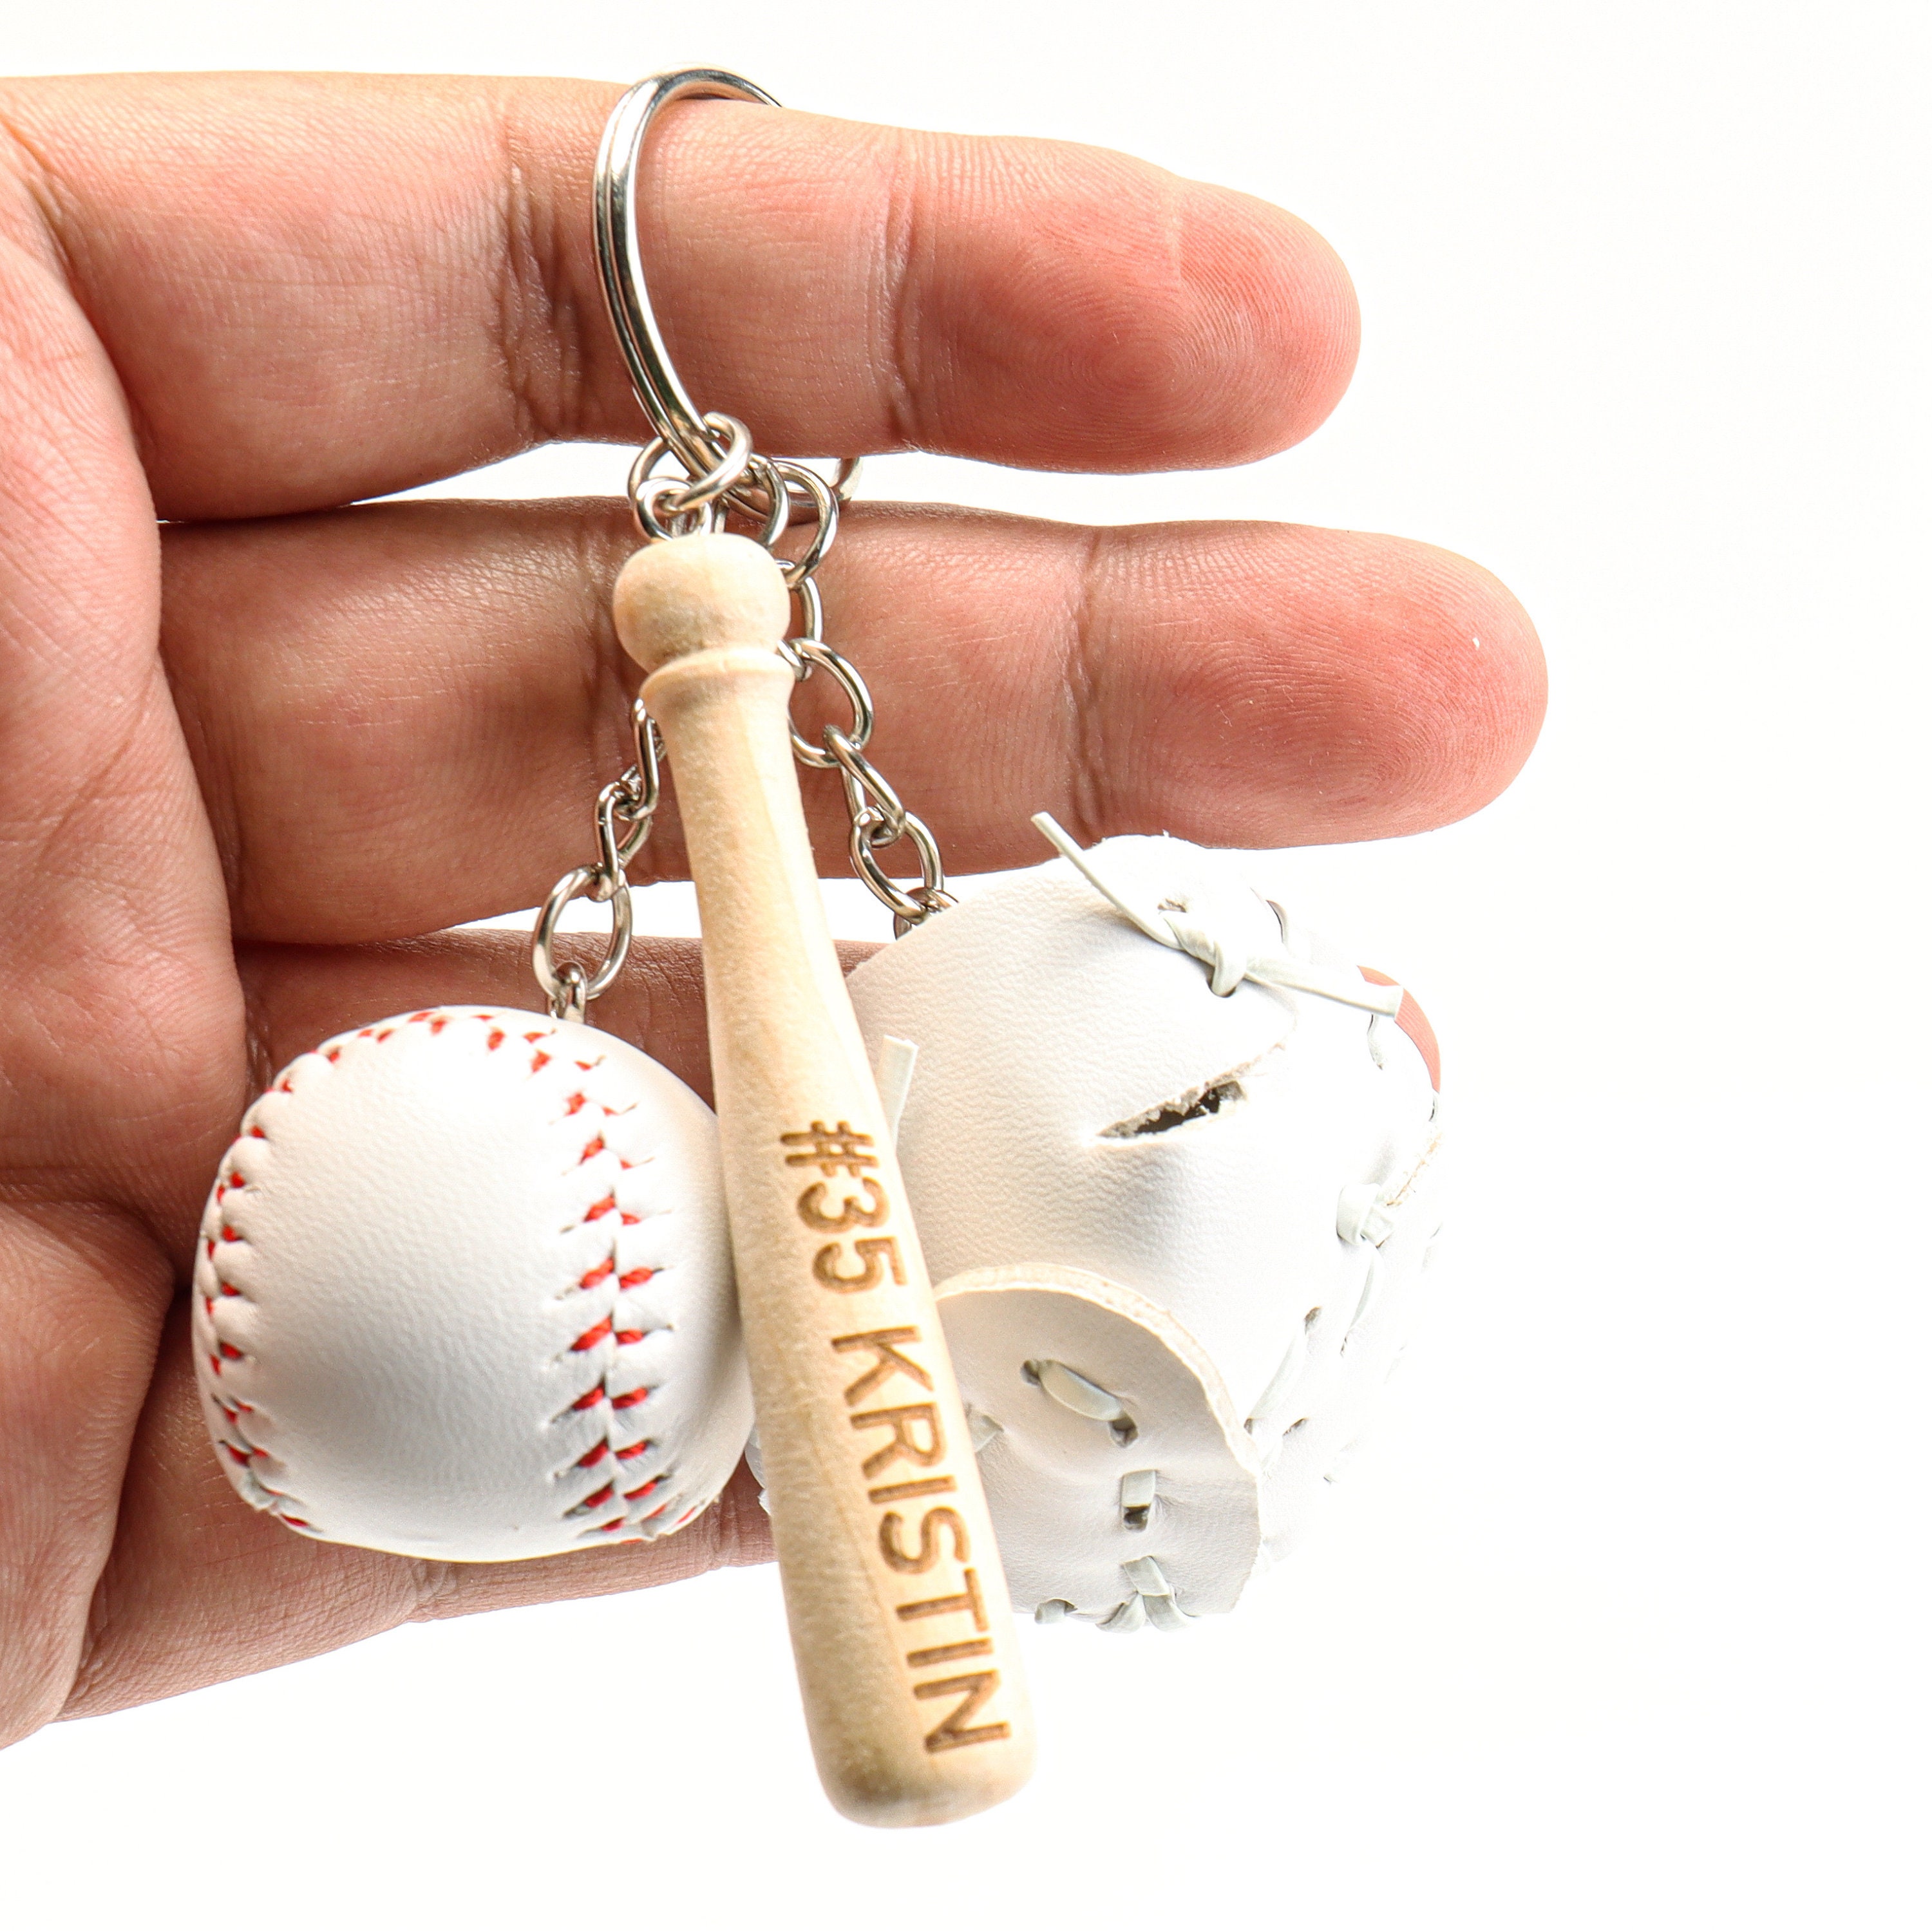 Shop for and Buy Baseball Bat and Ball Key Chain at . Large  selection and bulk discounts available.